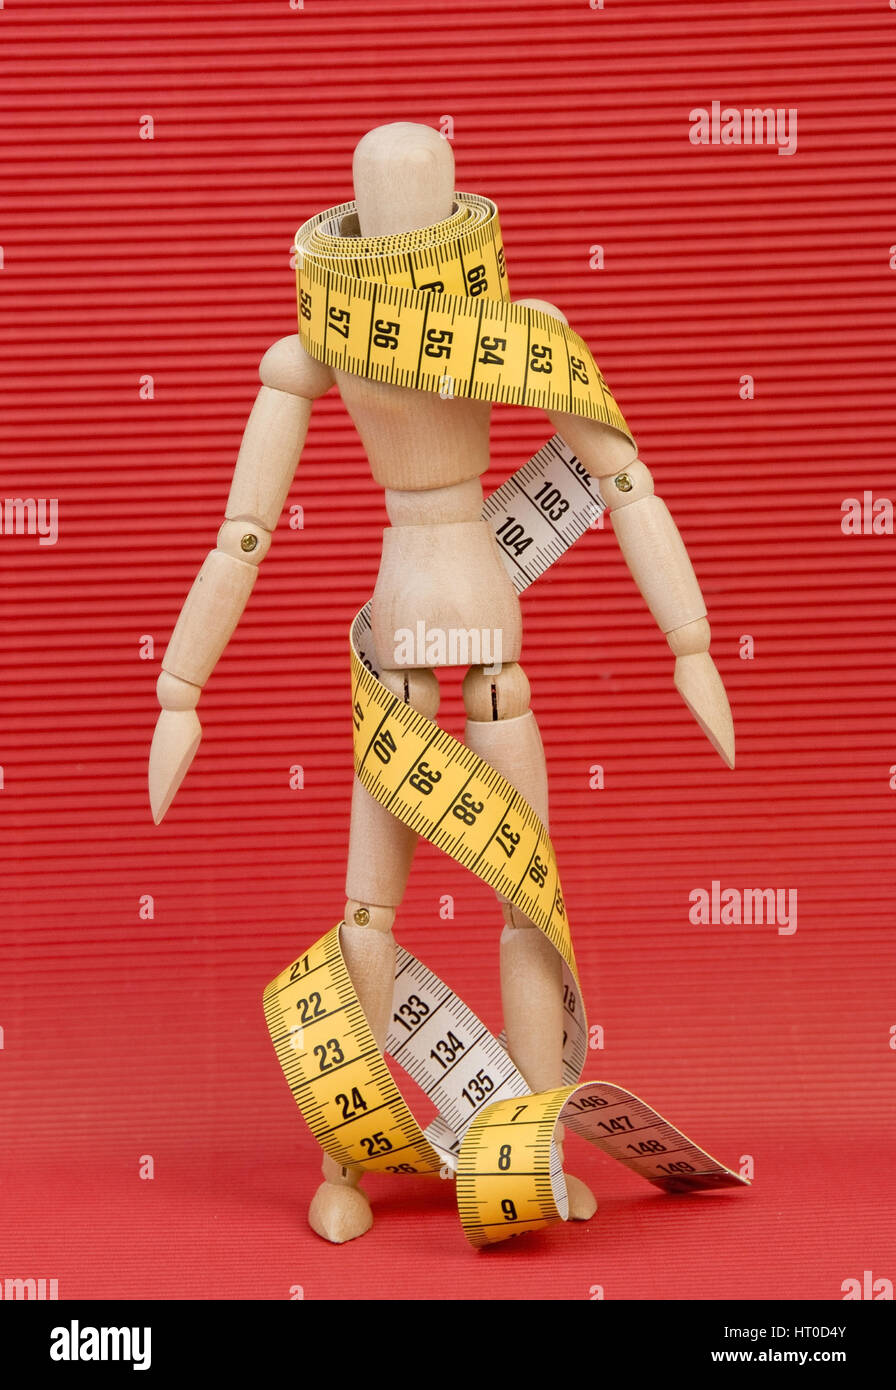 Gliederpuppe mit Ma?band umwickelt - jointed doll wound in a measuring tape Stock Photo